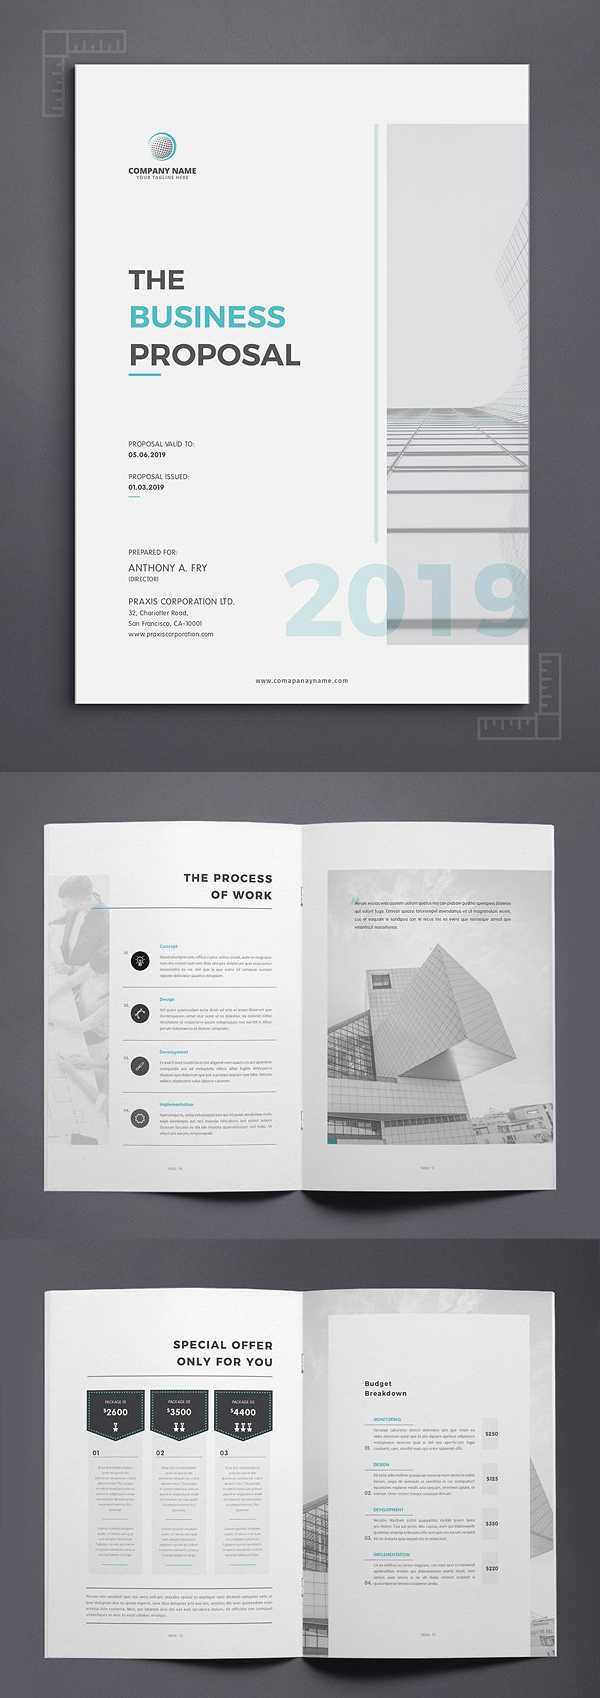 Business Proposal Templates | Design | Graphic Design Junction Regarding Free Business Proposal Template Ms Word